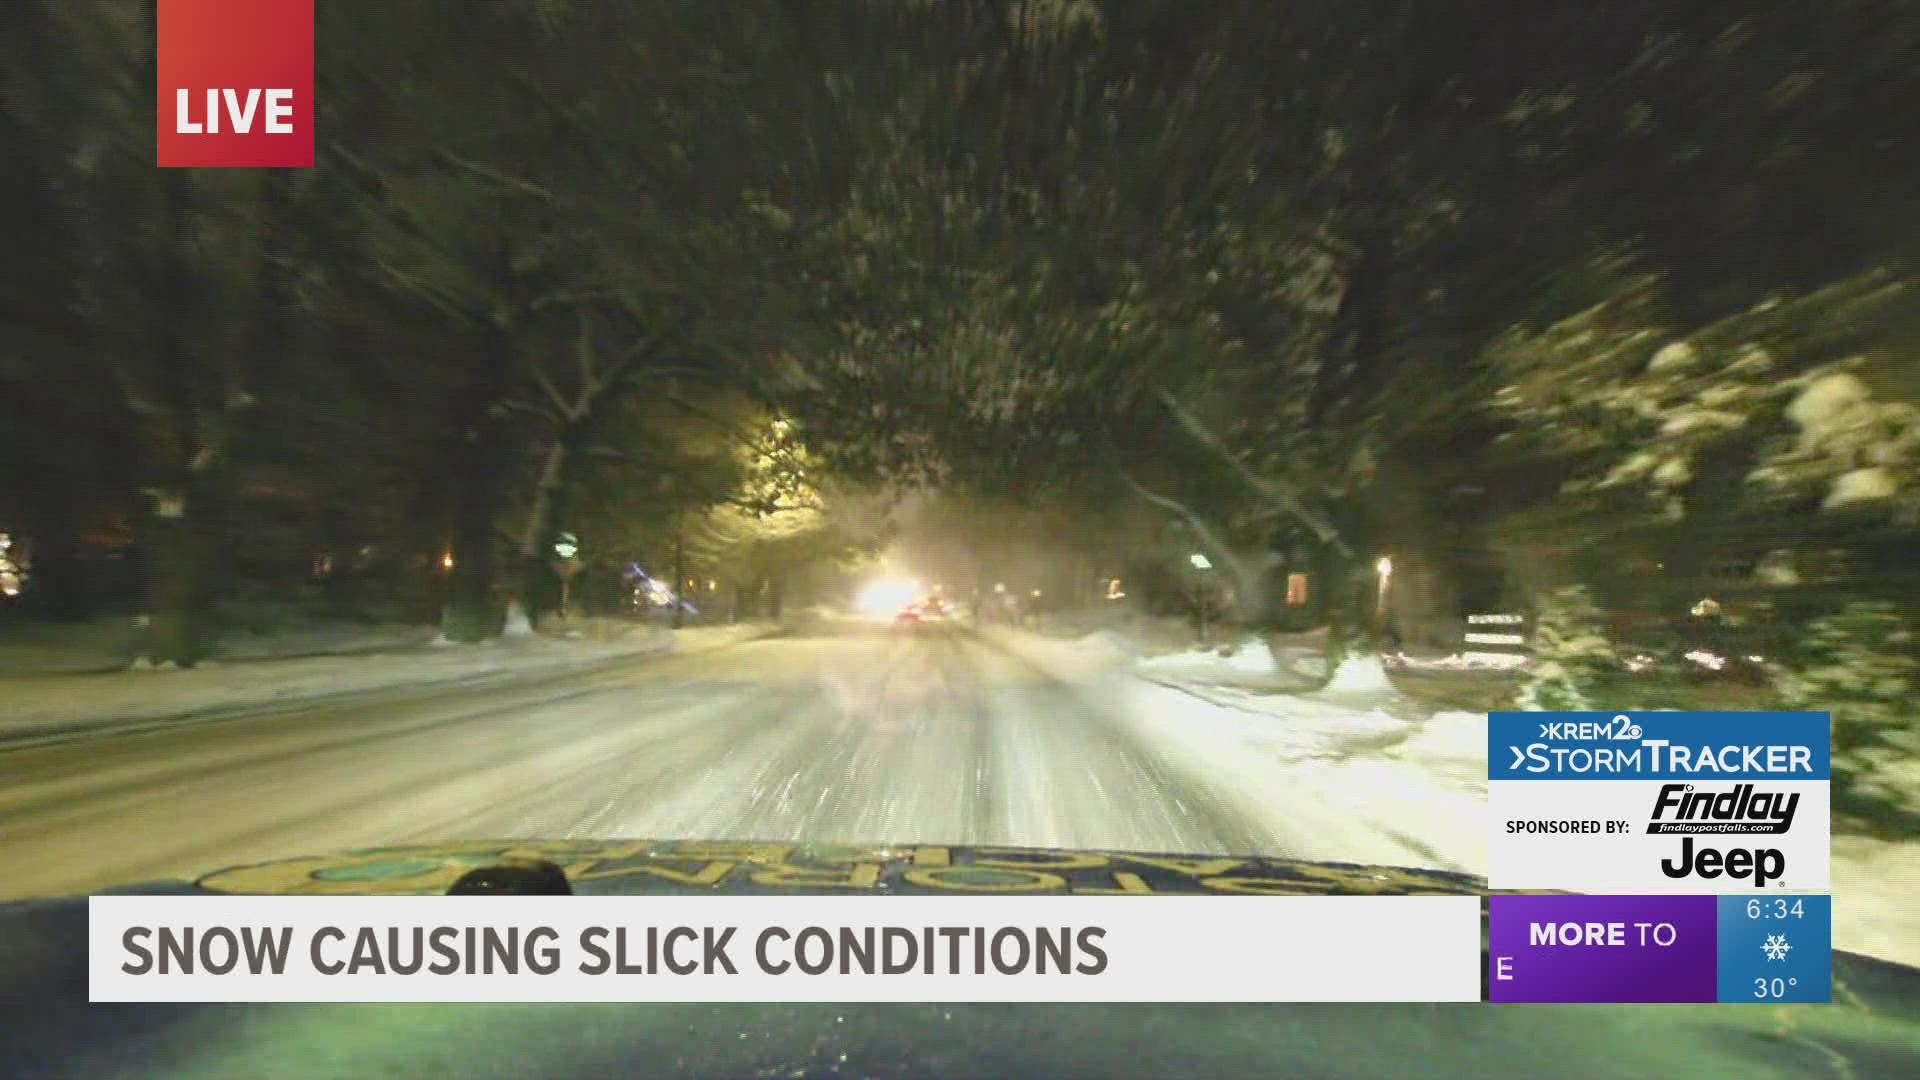 KREM 2's Amanda Roley takes the StormTracker out to see just how slick roads are getting in Spokane.